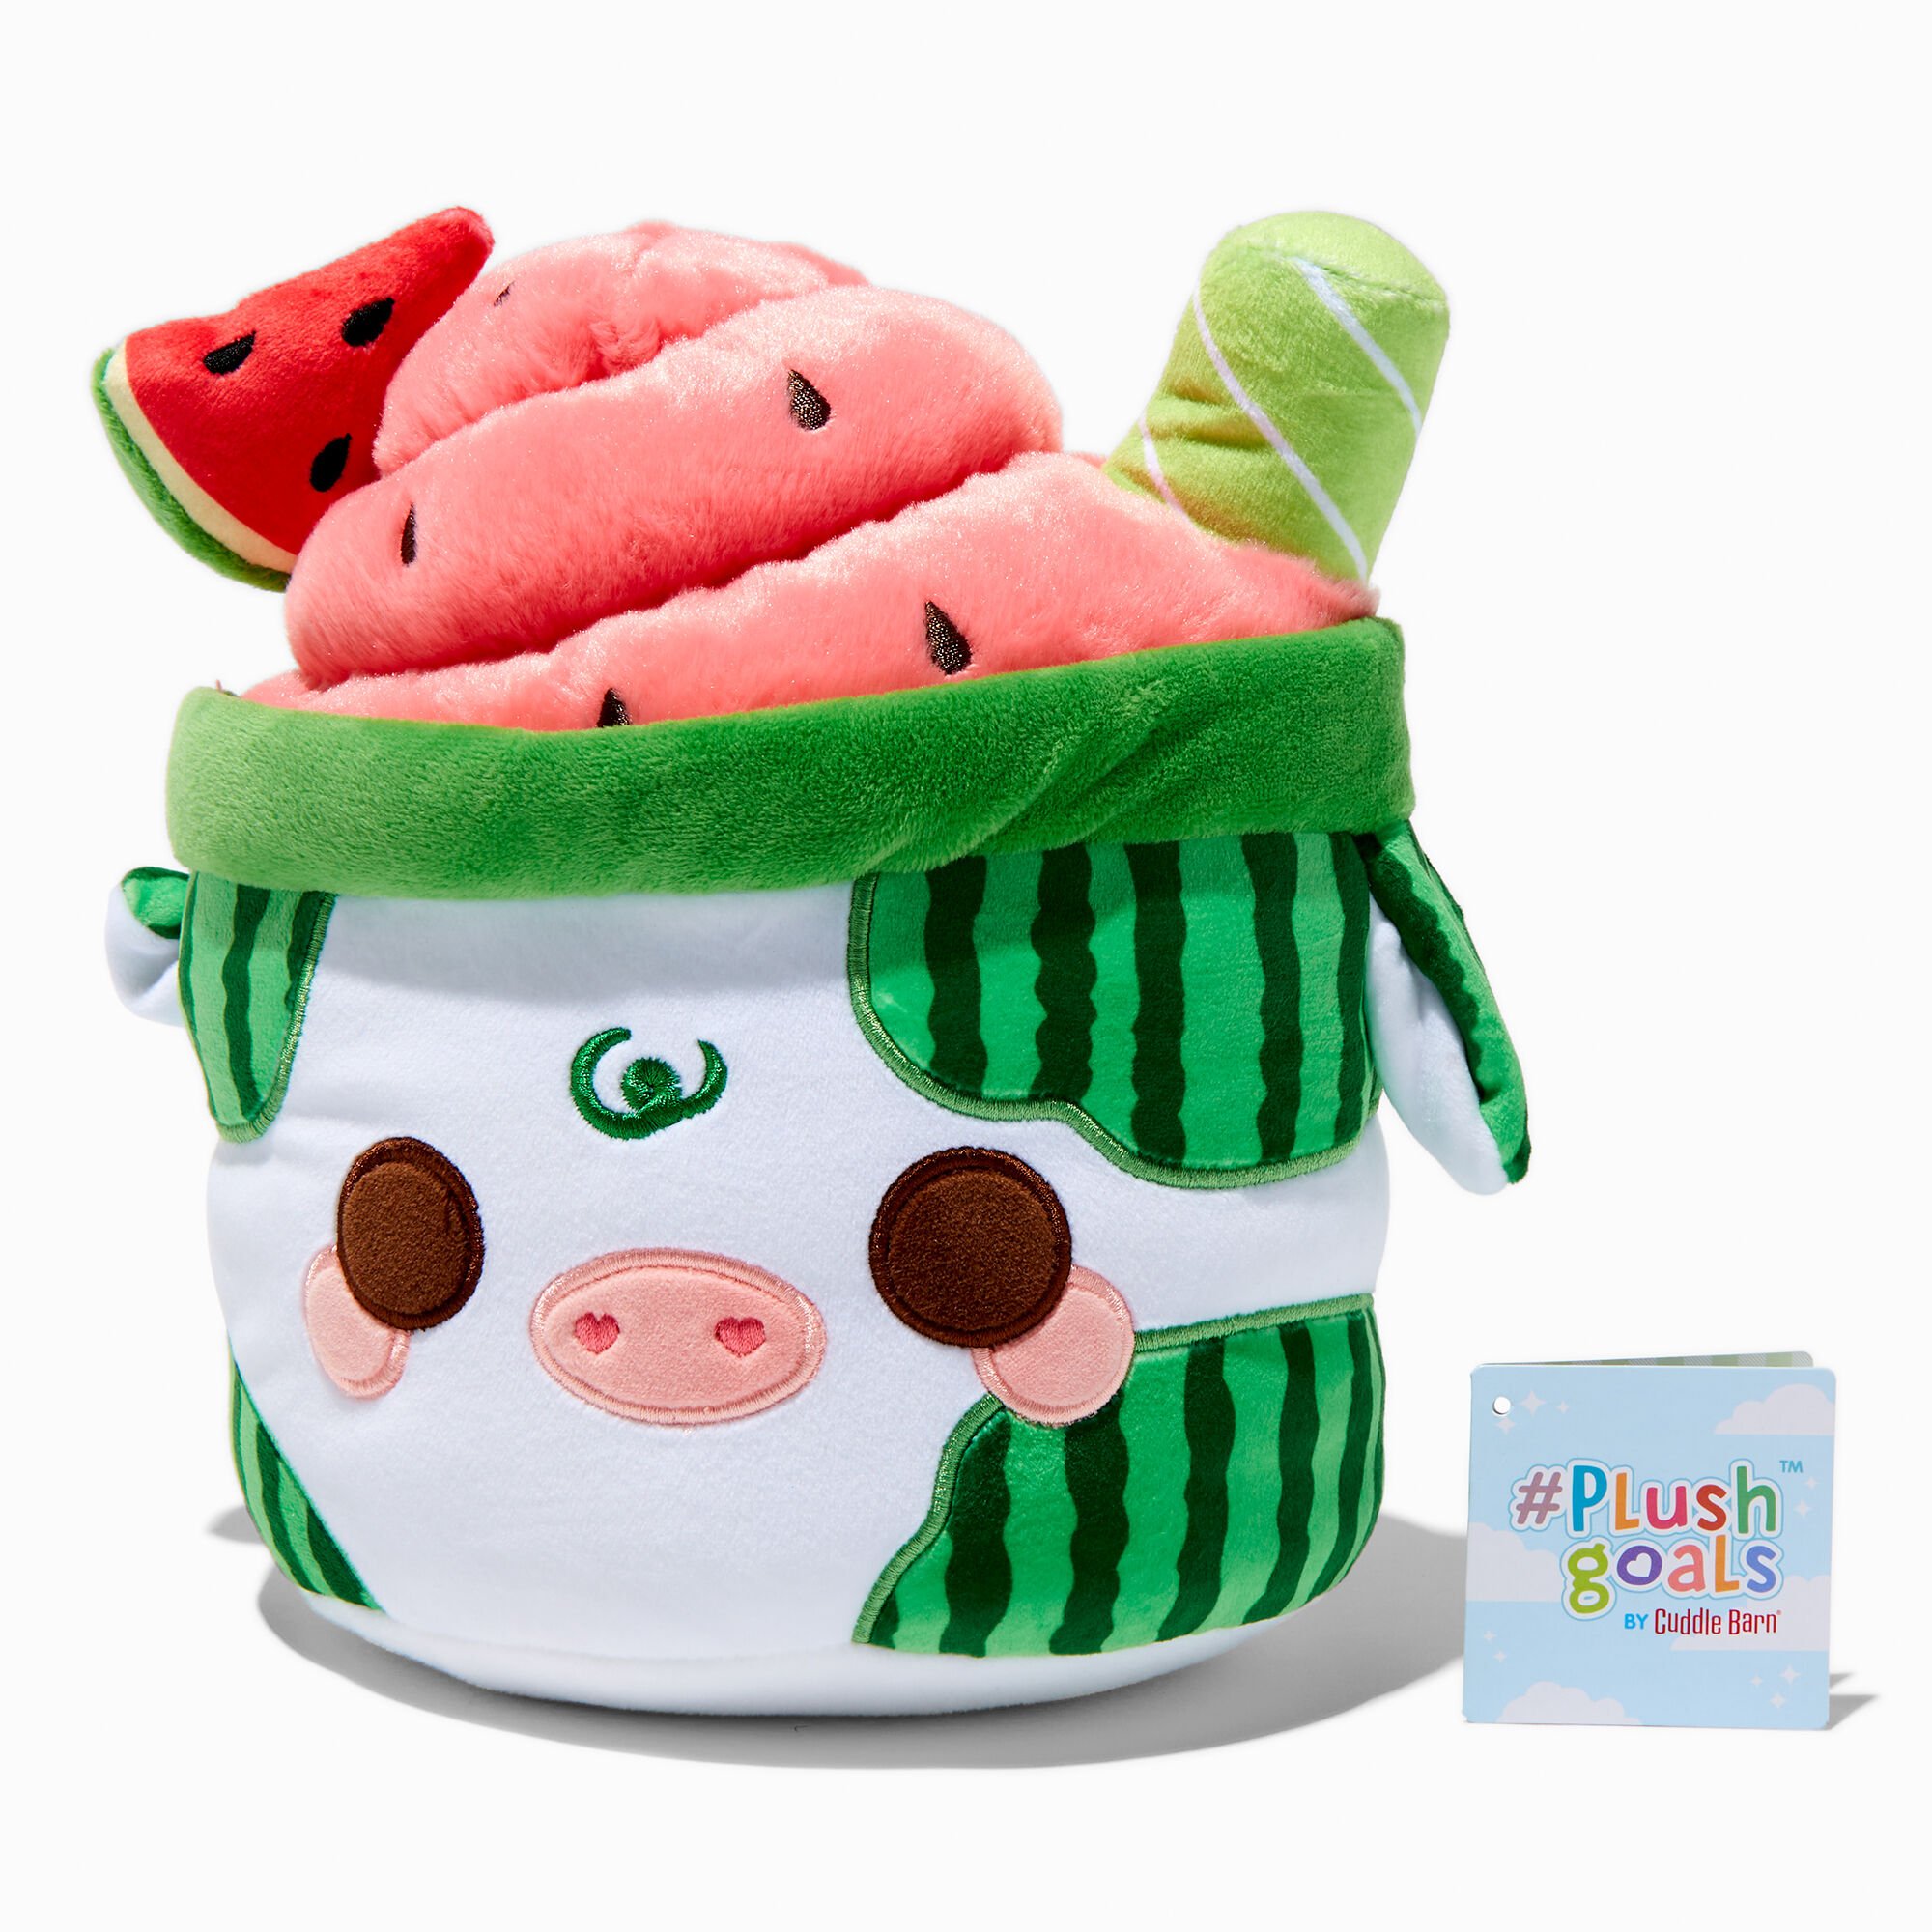 View Claires plush Goals By Cuddle Barn 11 Watermelon Mooshake Soft Toy information